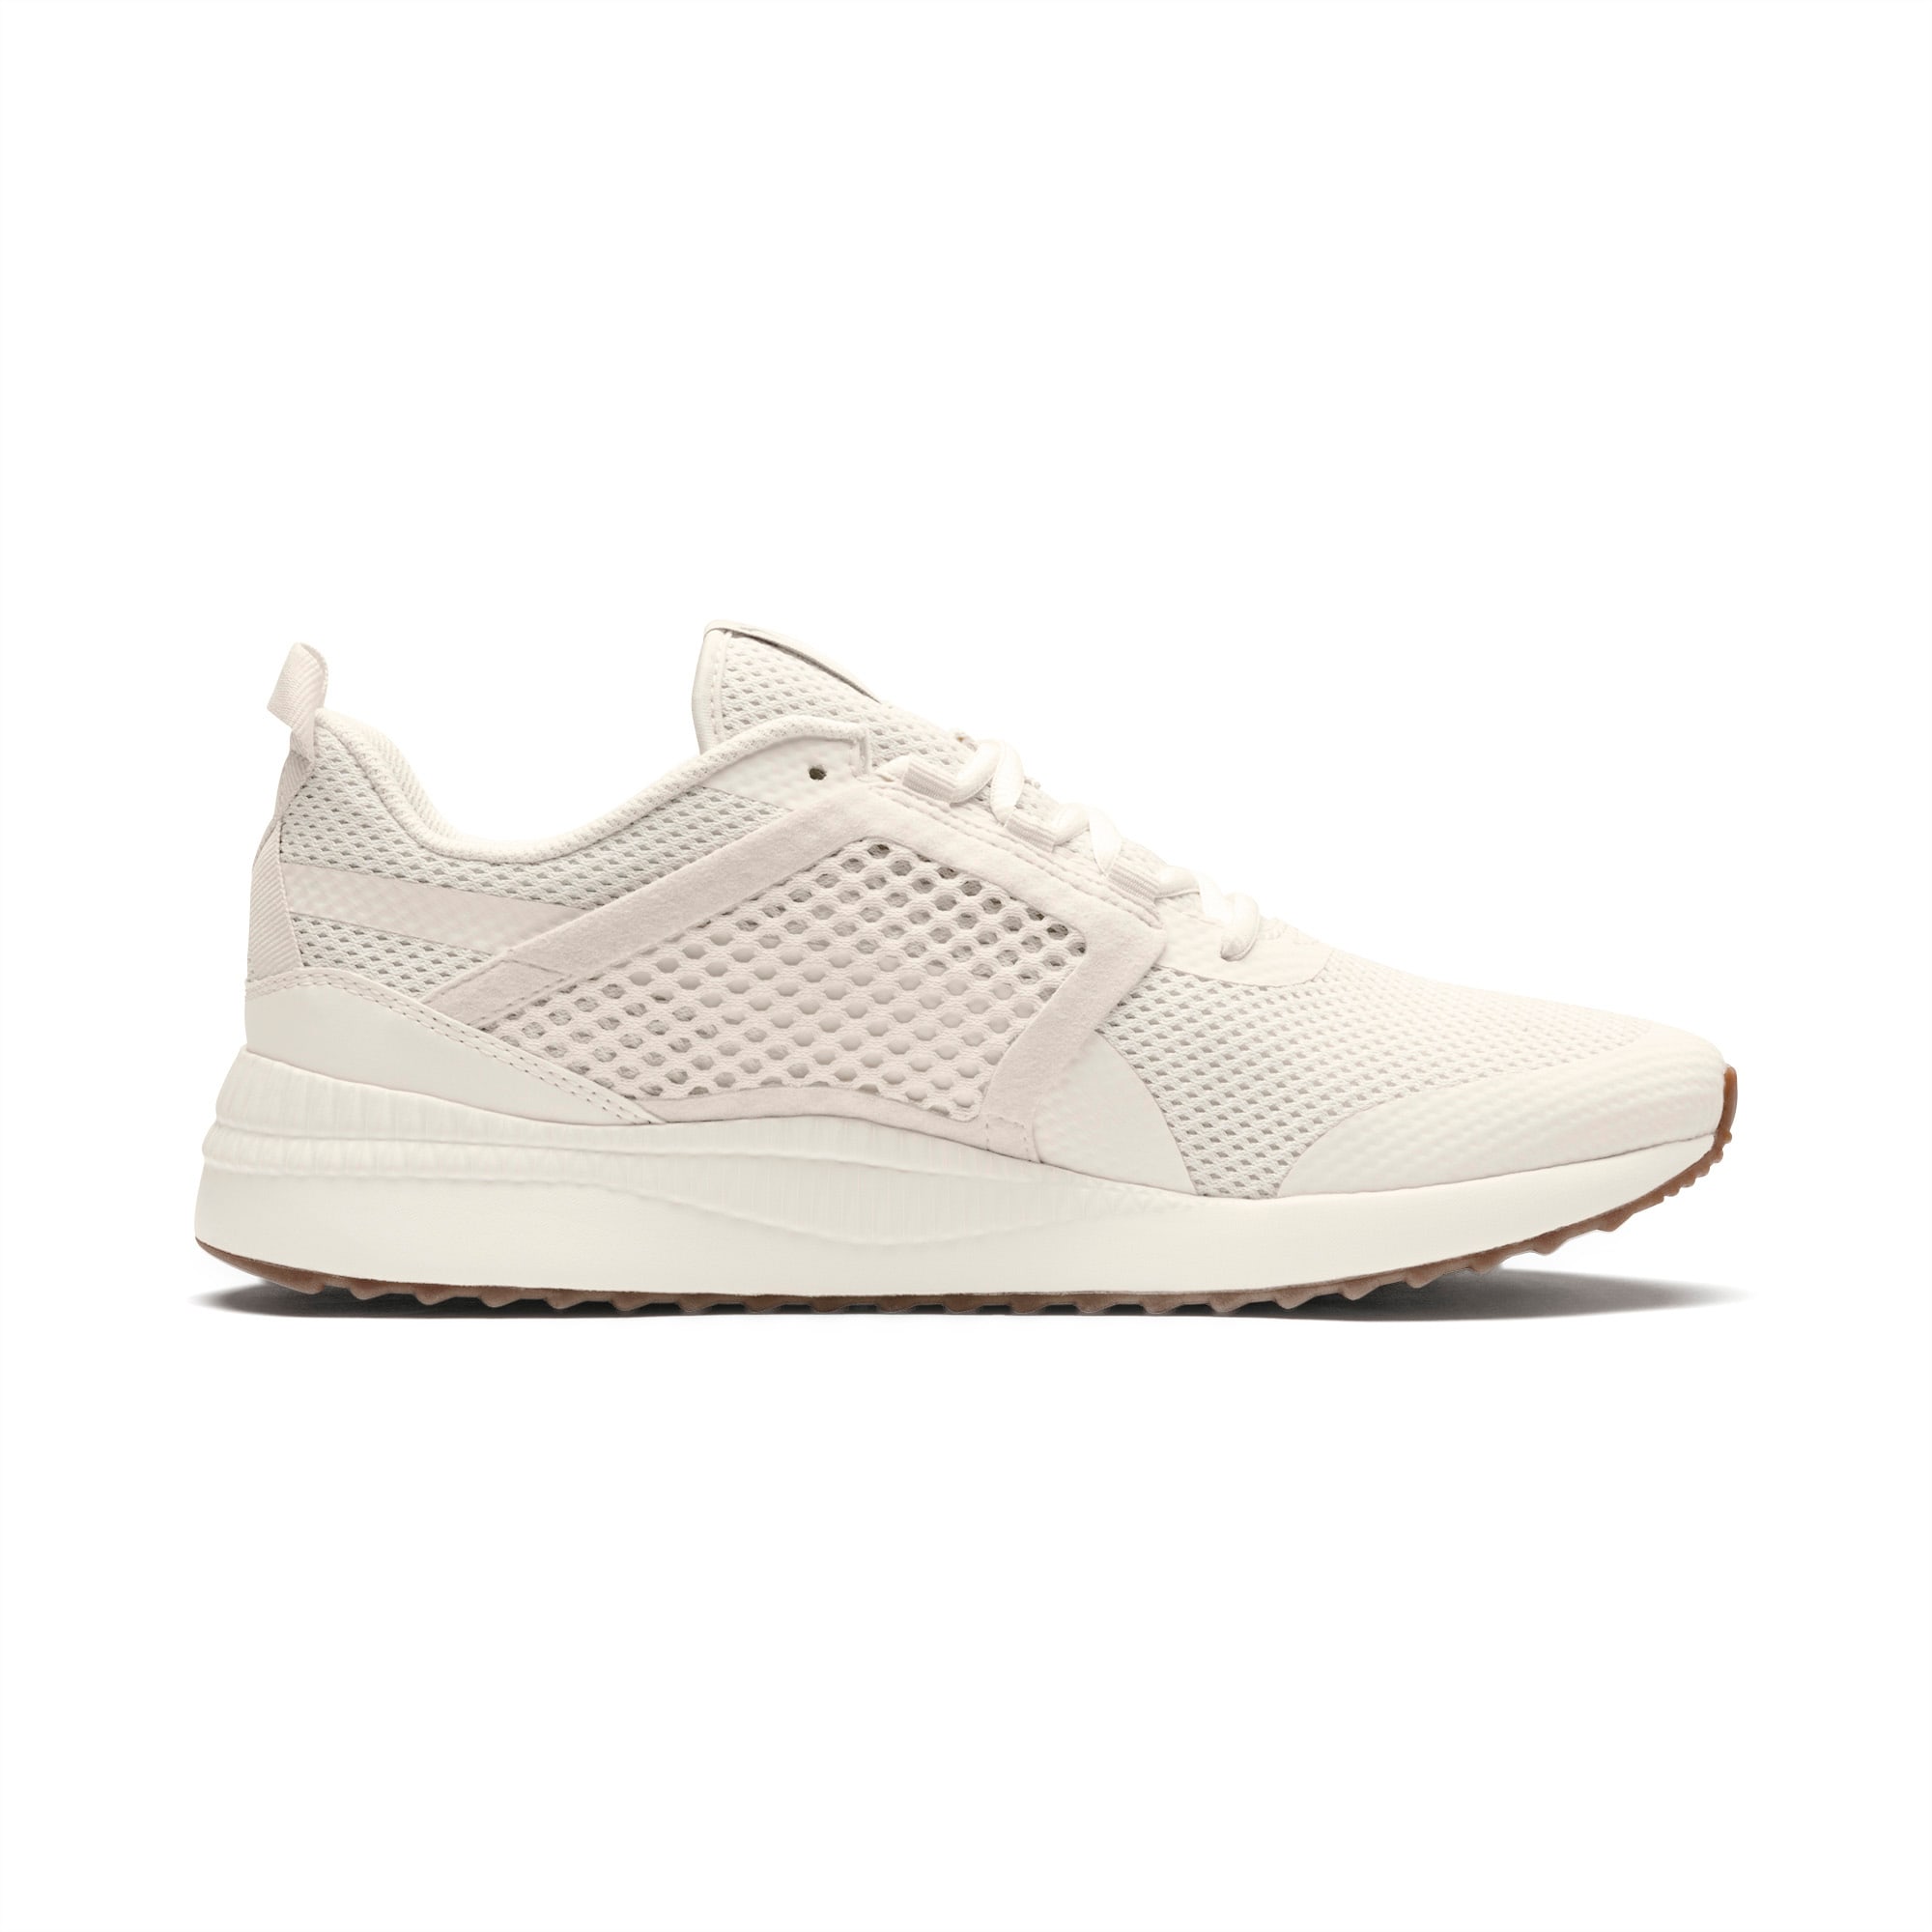 puma pacer next net sneakers